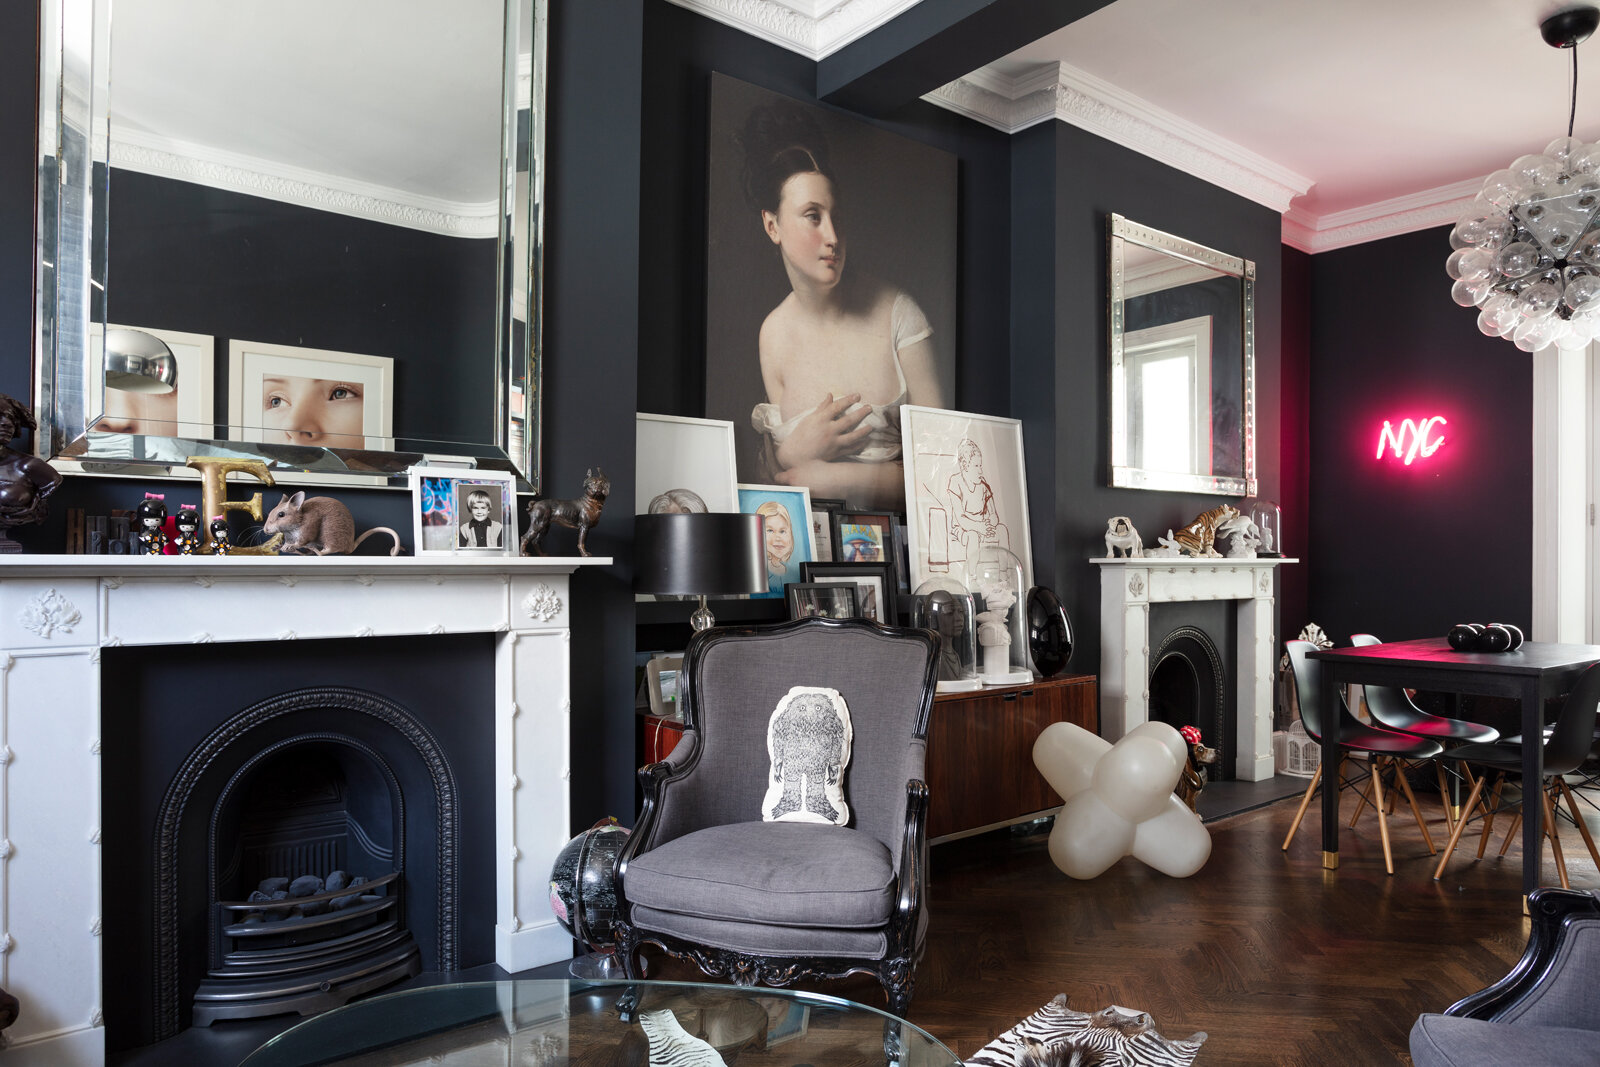 Black sitting room painted in Farrow & Ball's Railings with pink neon sign